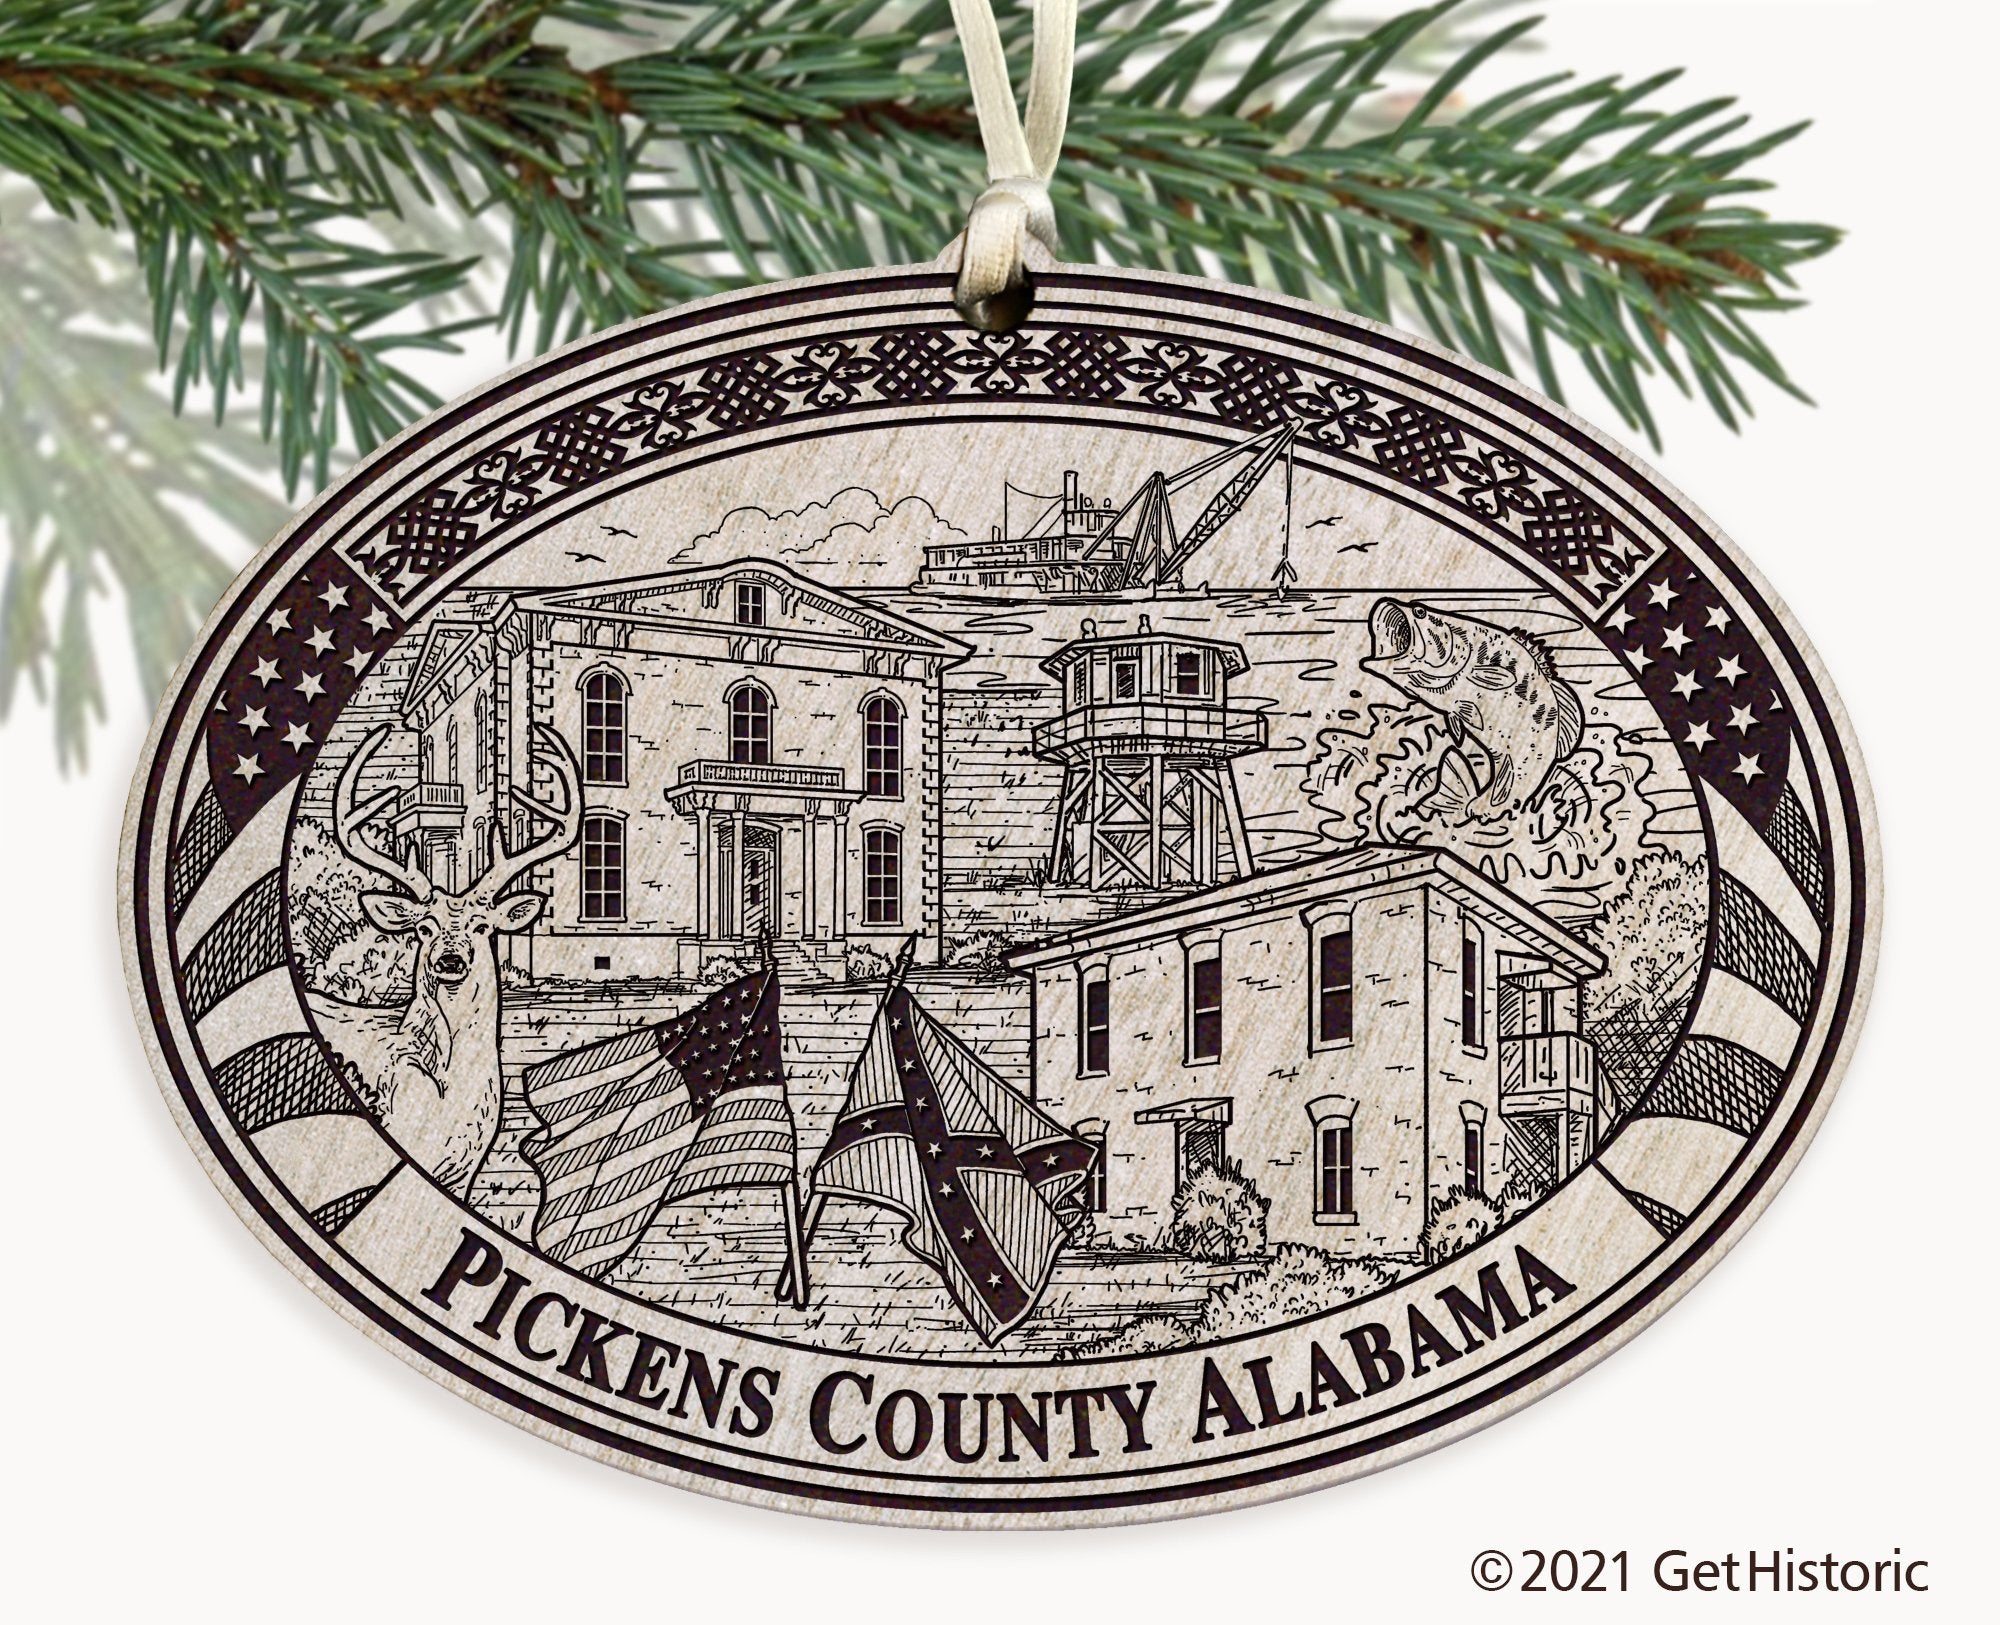 Pickens County Alabama Engraved Ornament